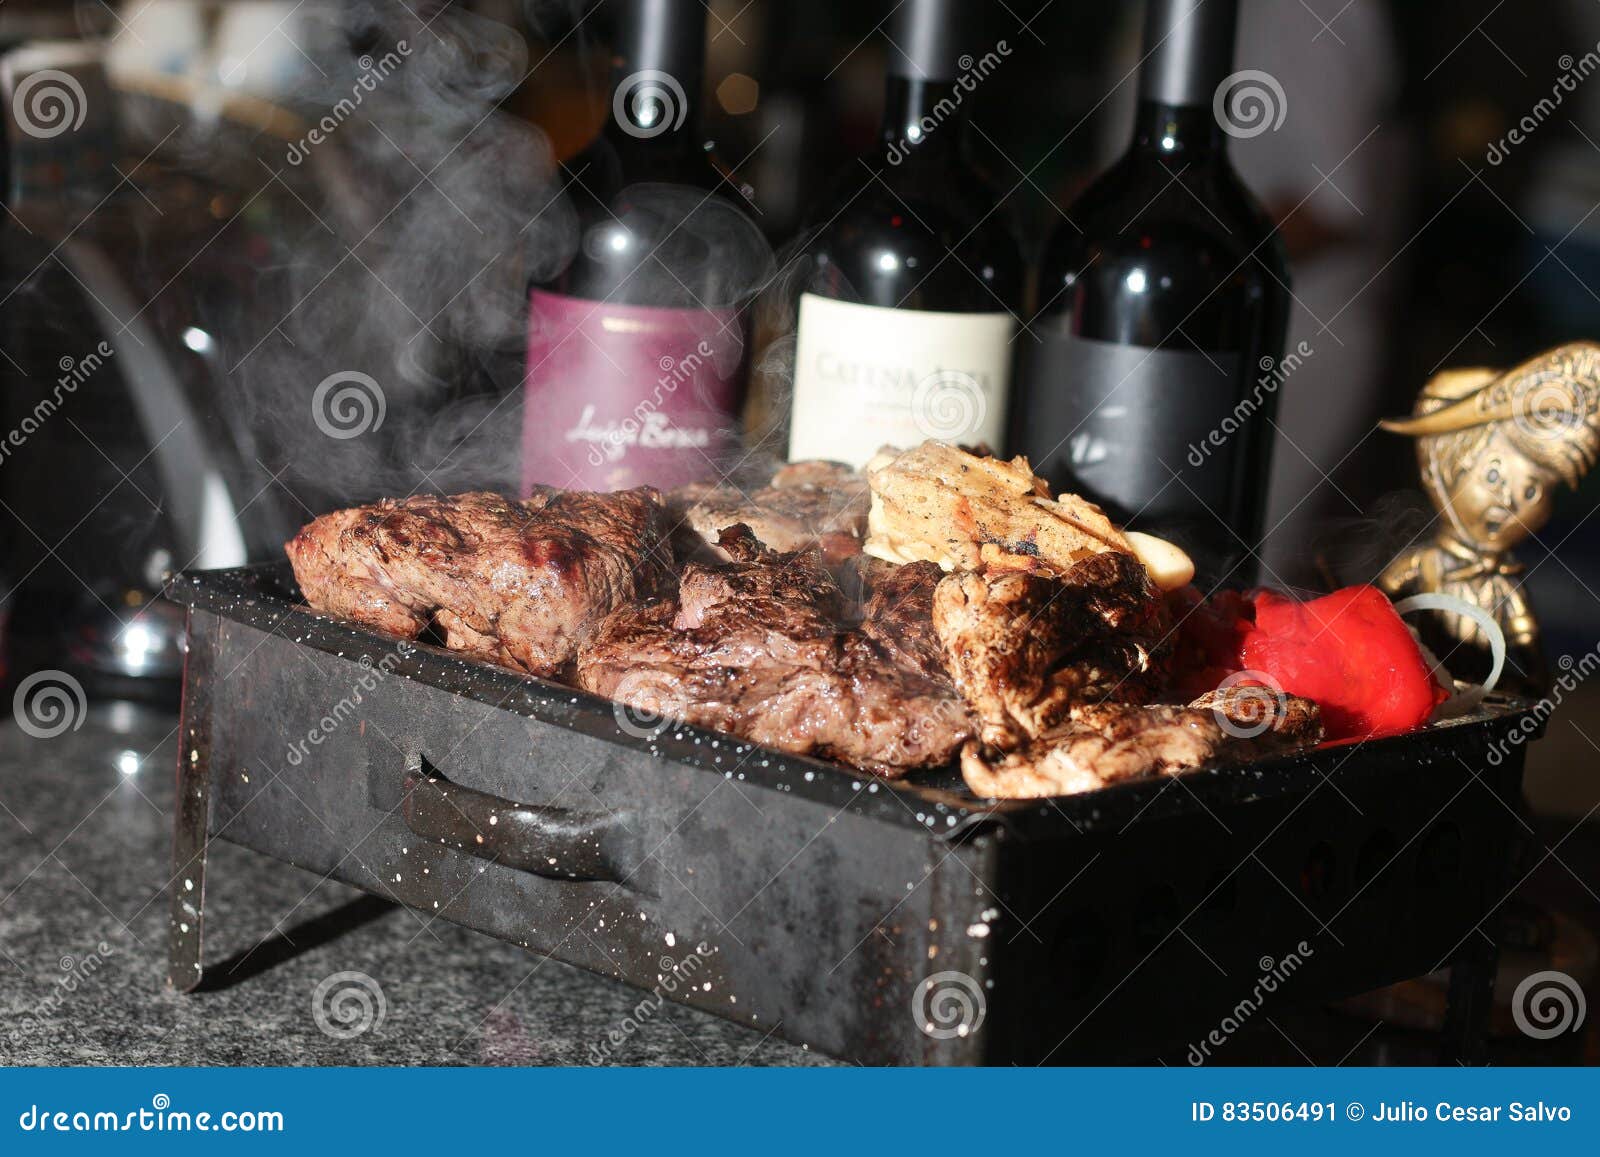 grill and bottle of wine